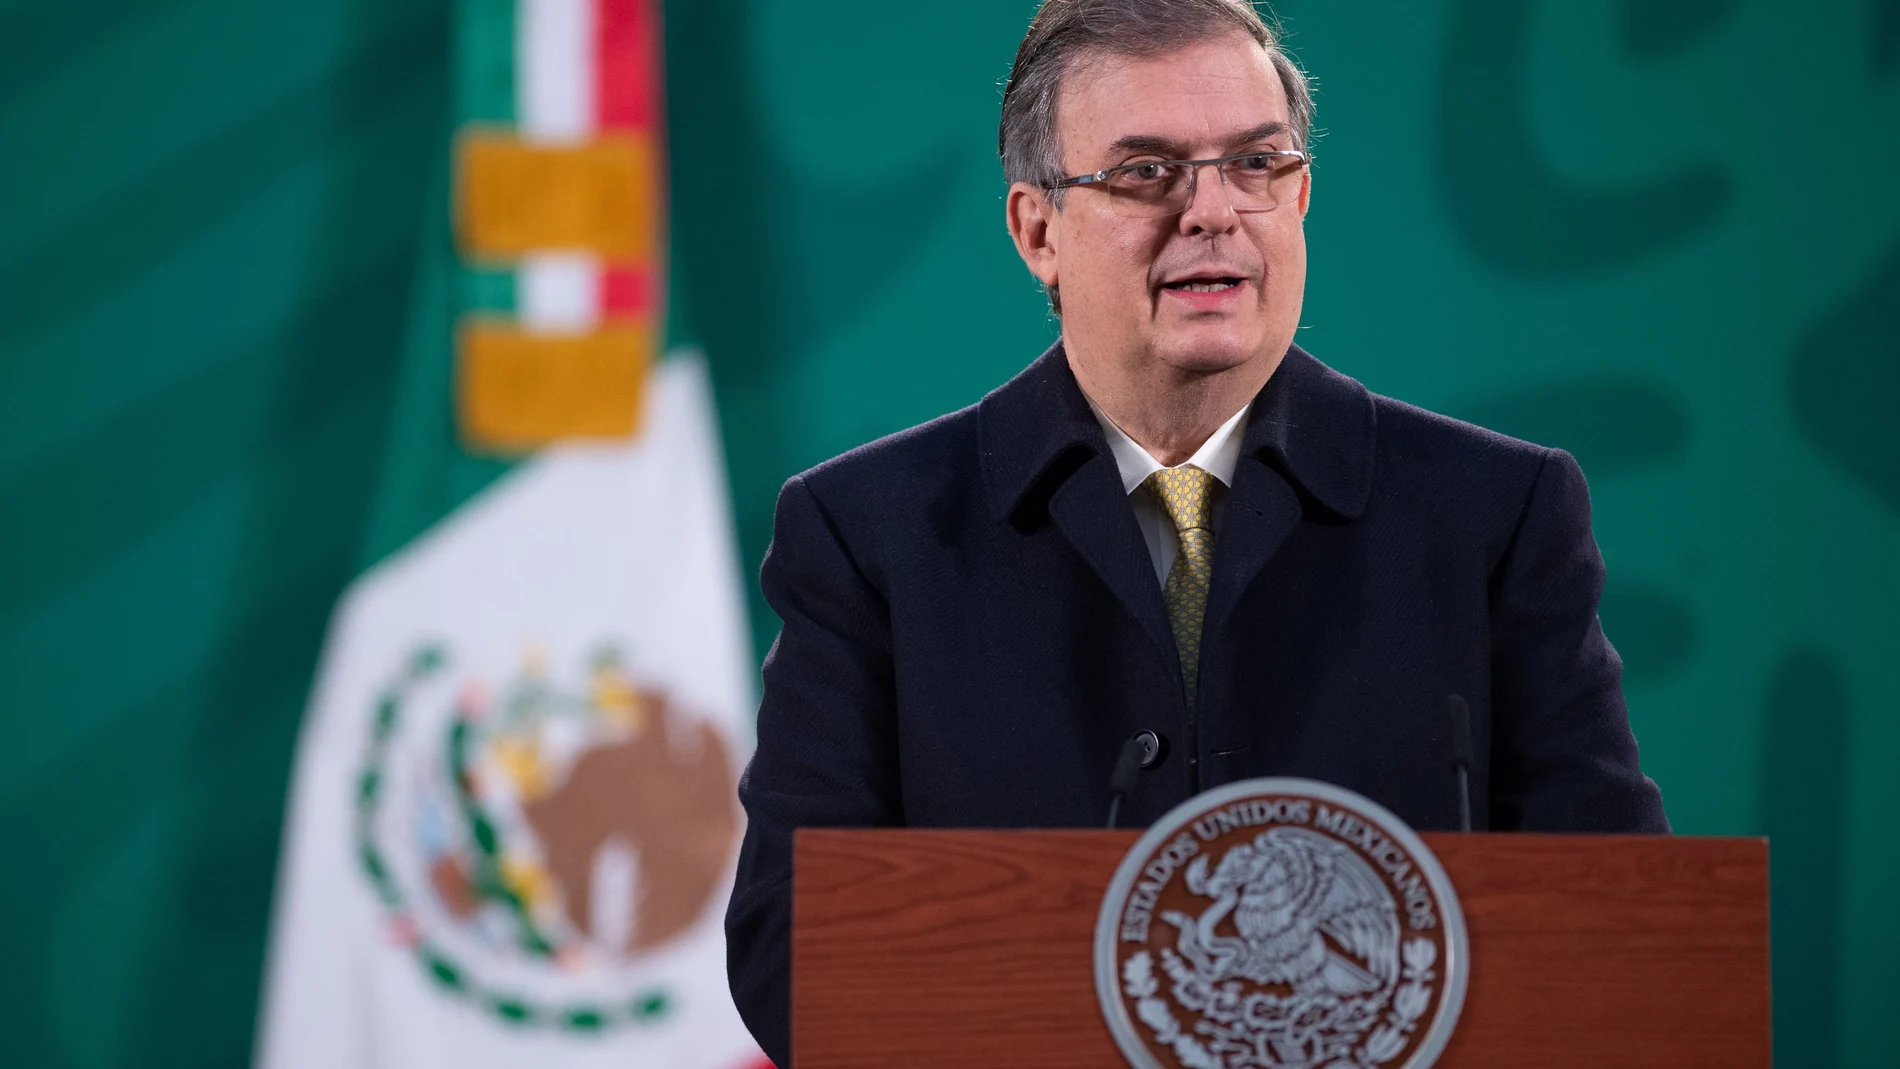 Mexico's Foreign Minister Marcelo Ebrard holds a news conference, as Mexico's will invoke labor provisions in the new North American trade pact in a bid to ensure that illegal migrants in the United States receive coronavirus vaccines, at the National Palace in Mexico City, Mexico January 13, 2021. Mexico's Presidency/Handout via REUTERS ATTENTION EDITORS - THIS IMAGE HAS BEEN SUPPLIED BY A THIRD PARTY. NO RESALES. NO ARCHIVES